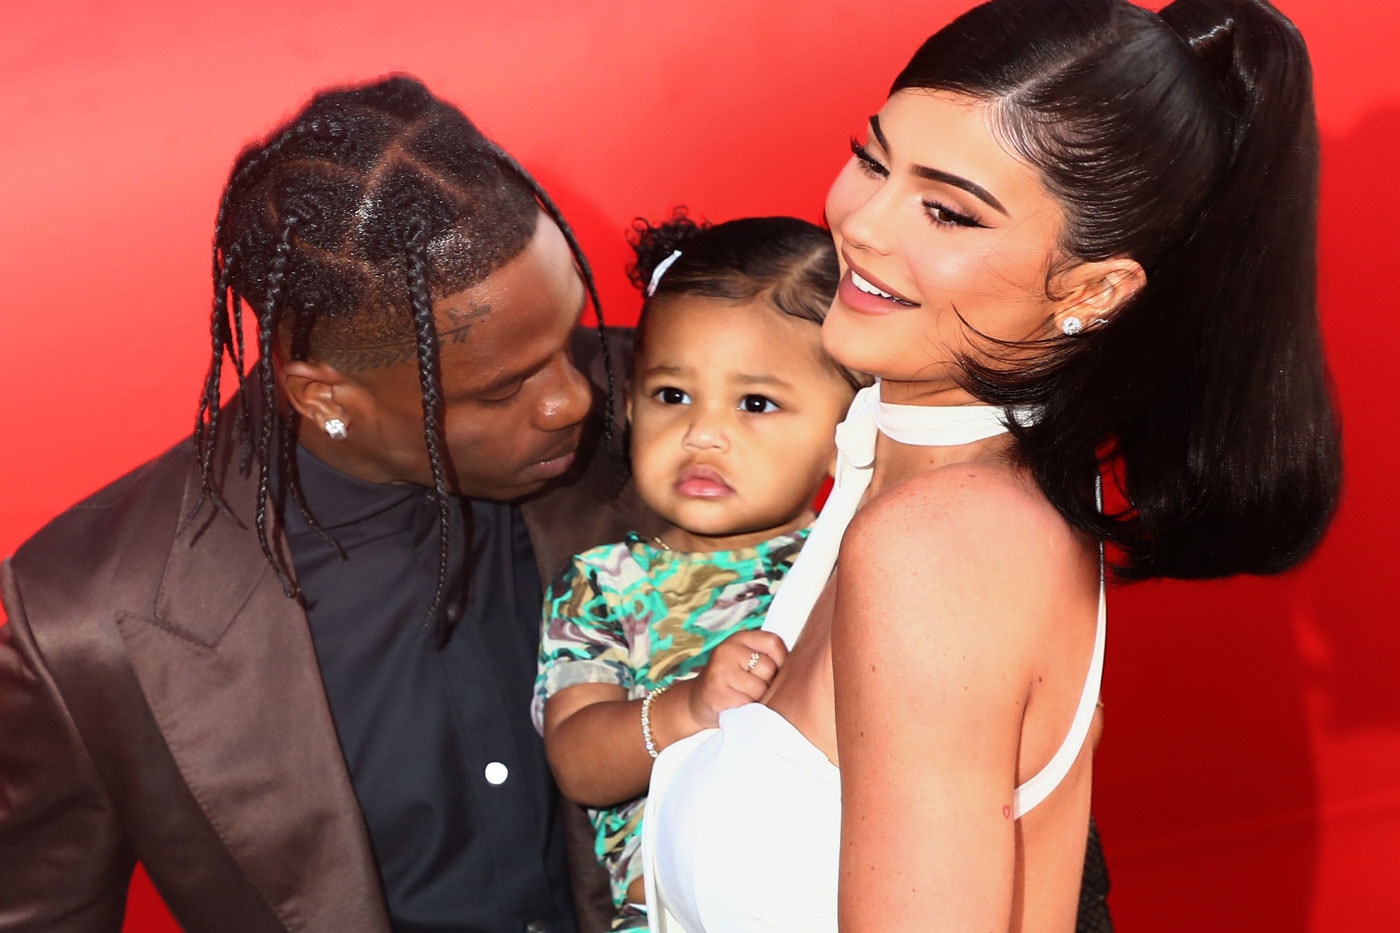 Travis Scott Gifts Kylie Jenner and Stormi Webster Matching Iced Out Diamond Rings jewelry stylish kid kardashian rapper hip hop kylie cosmetics kylie skin kylie cosmetics